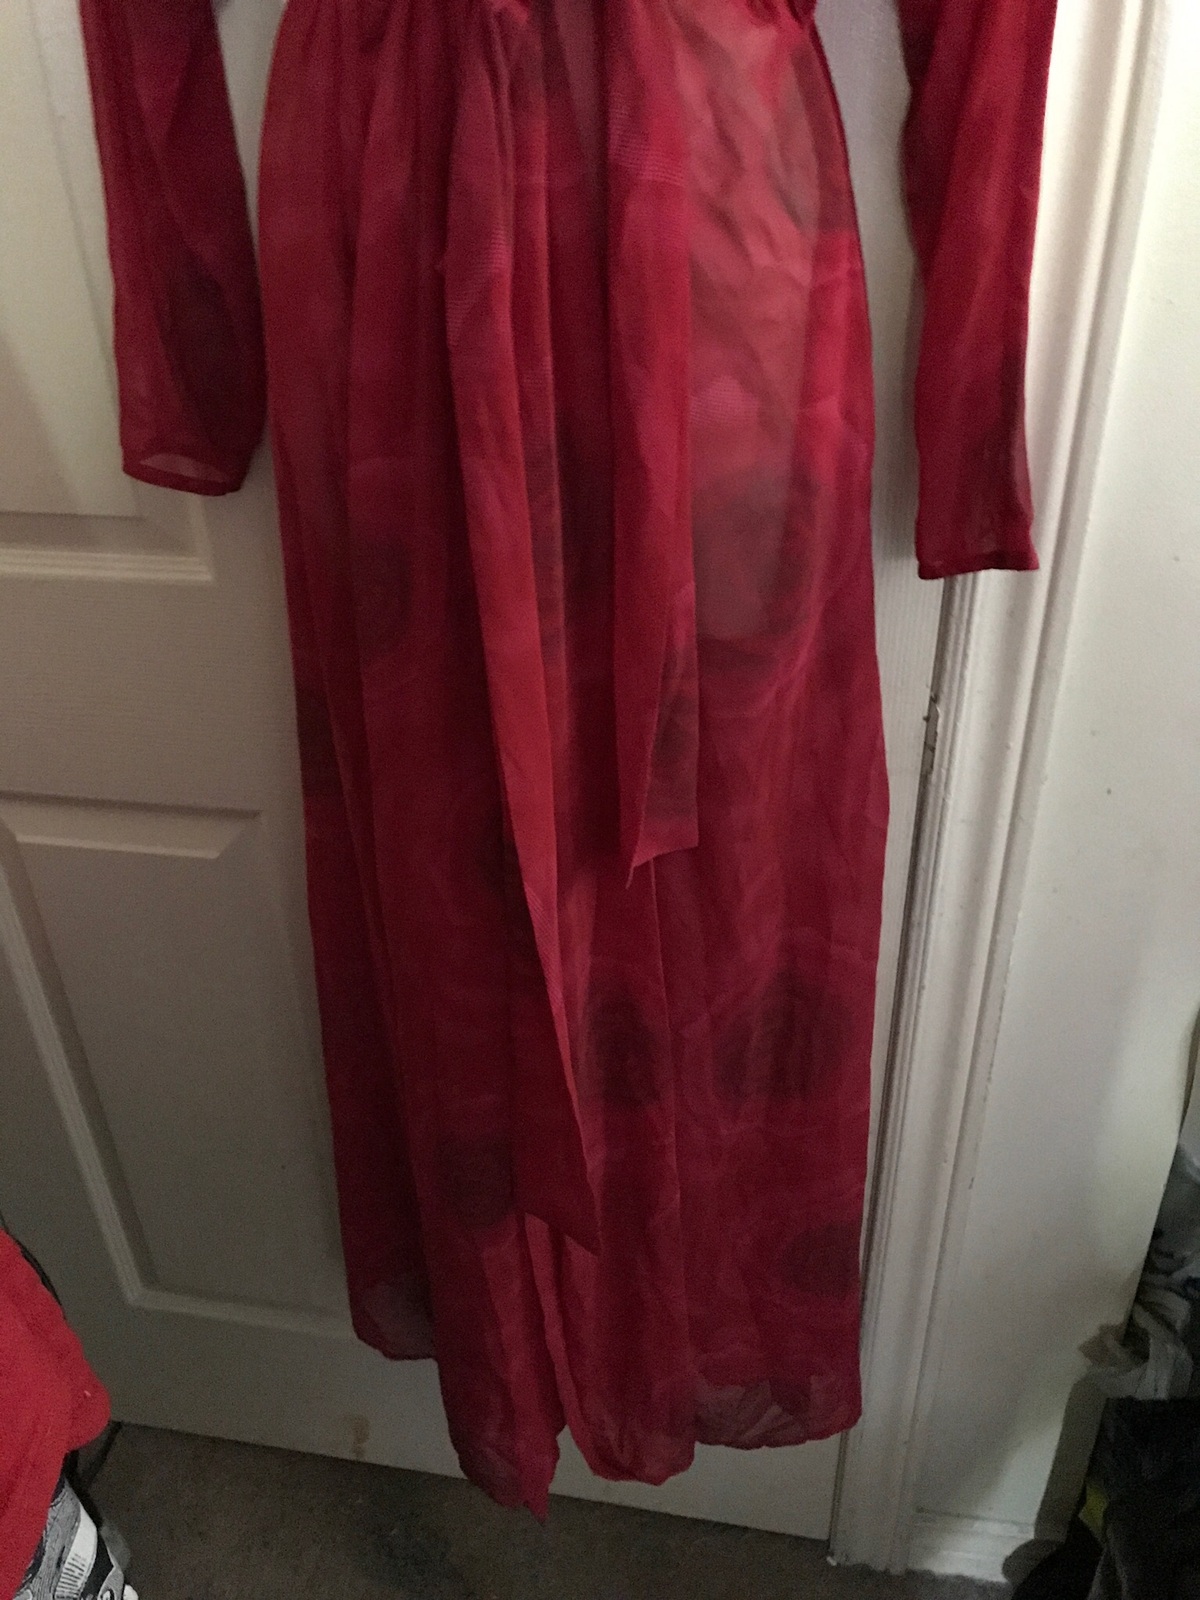 NWT Le Senza Red Robe Size S-M - Sleepwear & Robes